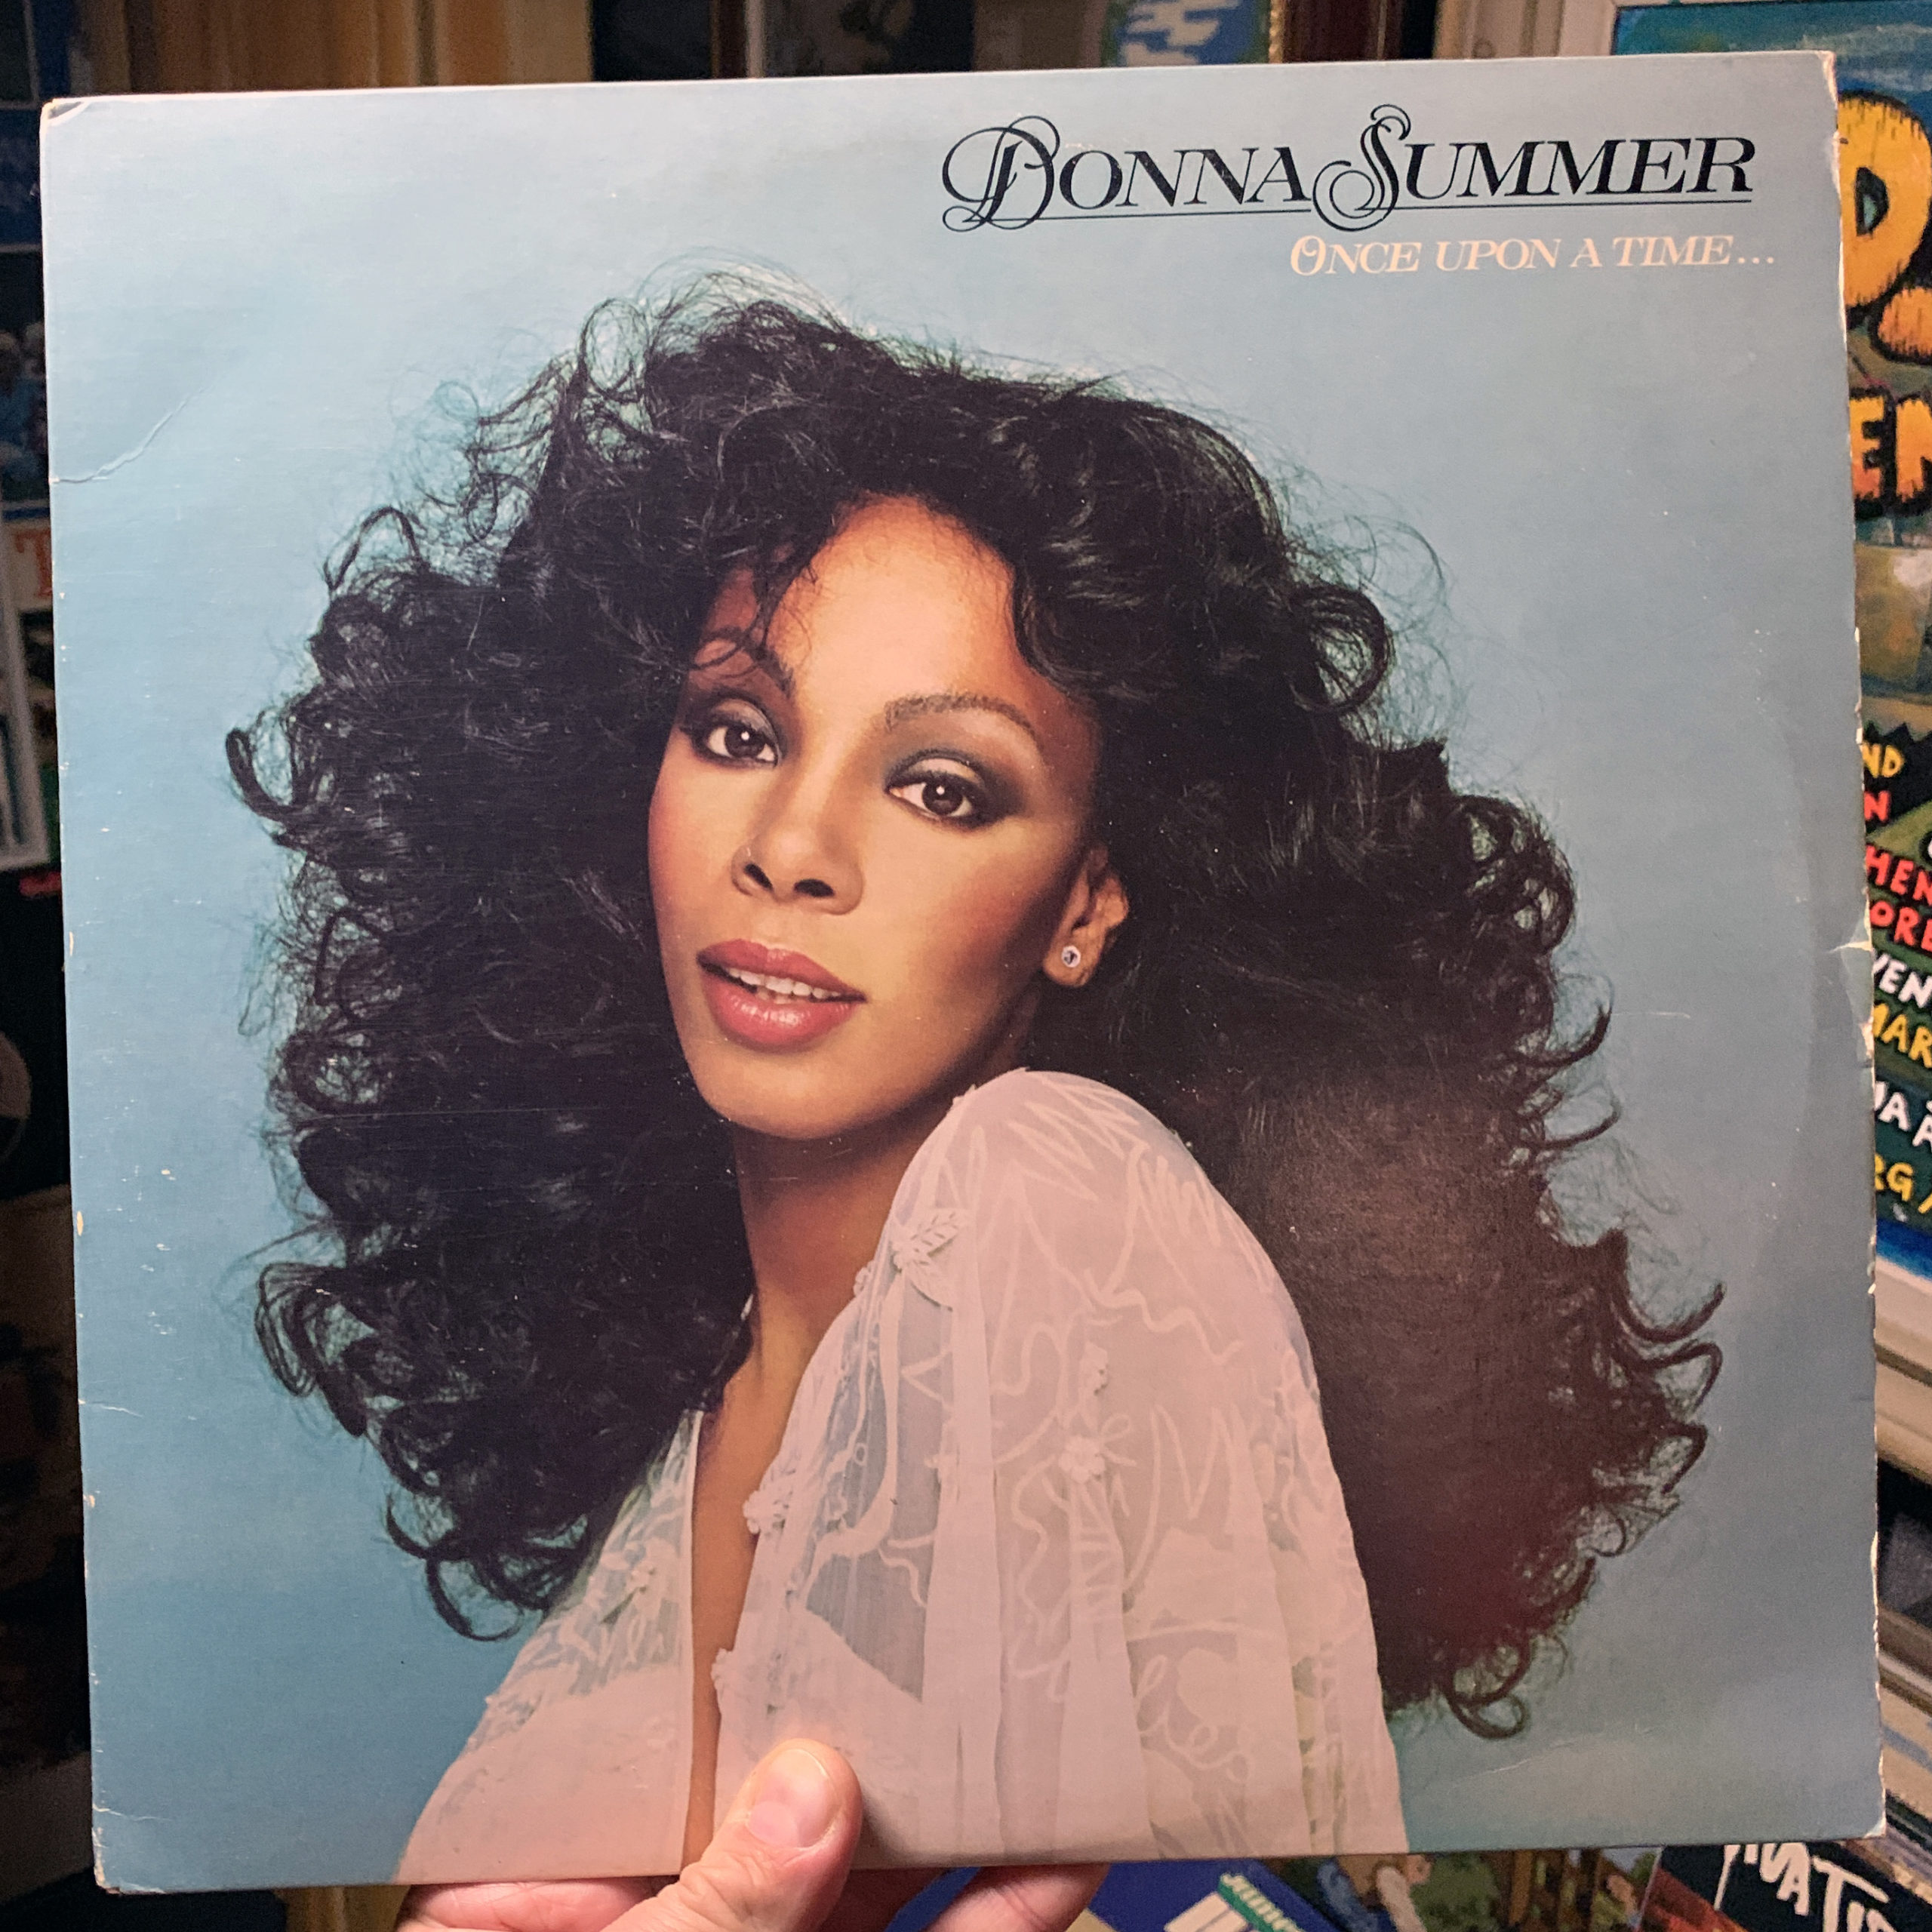 Donna Summer – Once Upon a Time